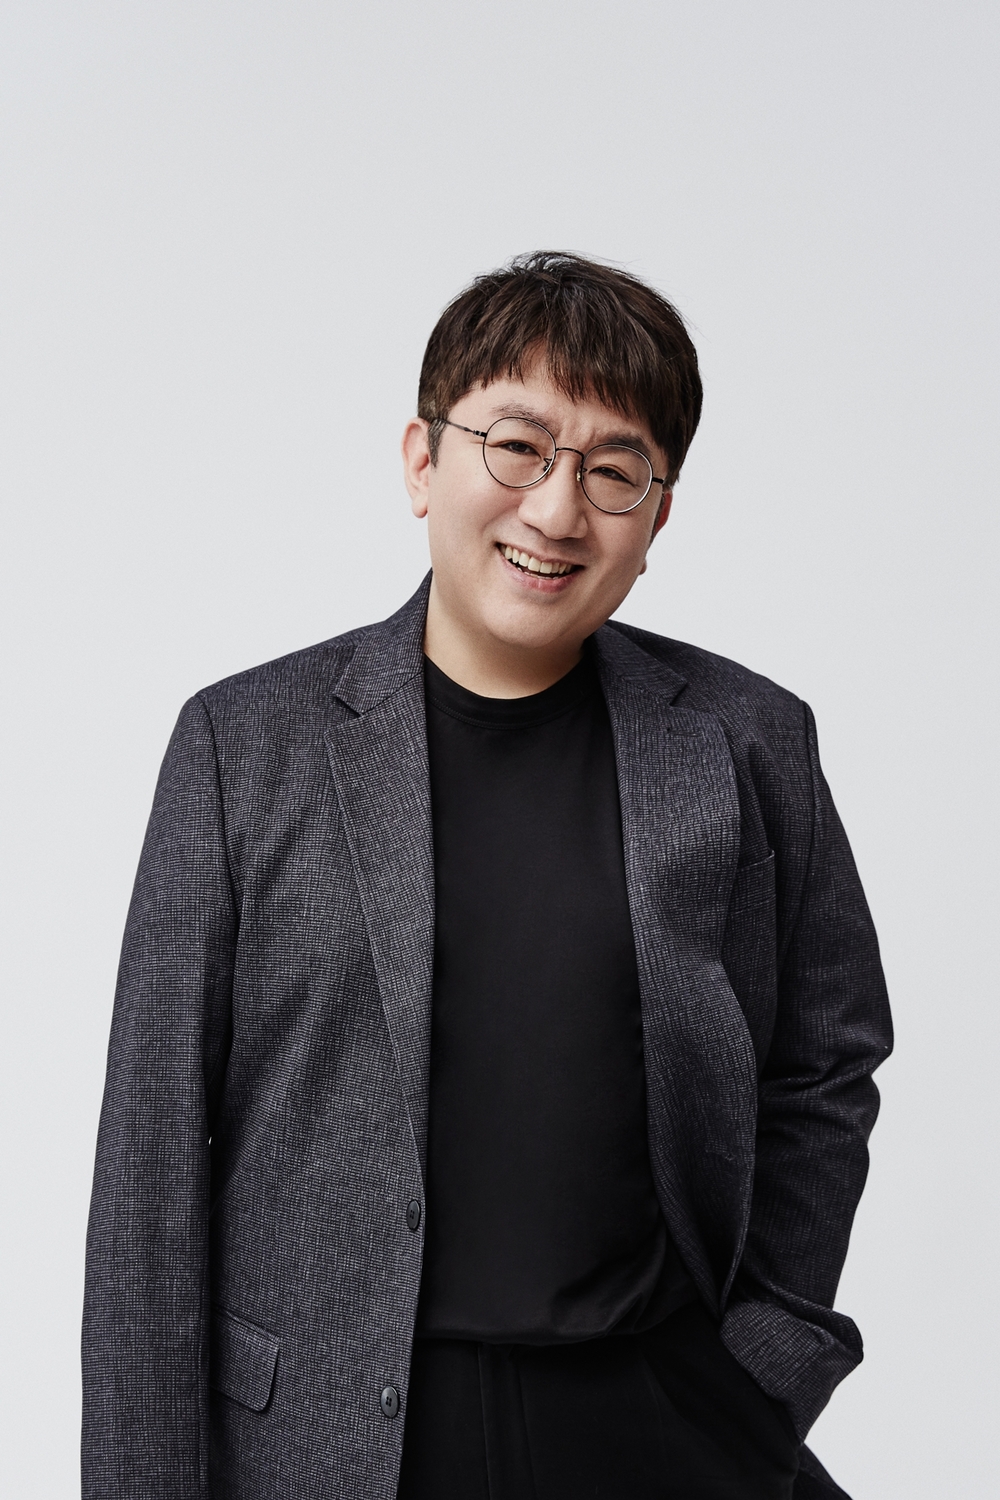 Bang Si-Hyuk, CEO of Big Hit Entertainment, was selected as the International Power Players, which moves the World music market.On May 21 (local time), United States of America Billboard announced 73 The International Power Players, and Big Hits Bang Si-Hyuk representative was selected as a Power player in the music production category.The International Power Players is a prestigious list of Billboards industry leaders who move the World music market since 2014.In addition to CEO Bang Si-Hyuk, Stuart Camp, manager of Ed Sheeran and owner of Grumpy Old Management, was named Manager of the Year and was named on the list by celebrities from the former World music industry.Billboard said, The group BTS Love Yourself: Her album, produced by Bang Si-Hyuk, sold more than 1.6 million copies in the previous world, was the first Korean group to make its name in the Billboard 200 TOP 10, and the album title song DNA was ranked 37th in Digital Song Sales.We expect more K-Pop singers music to enter the charts, said Bang Si-Hyuk, CEO of Billboard Magazine.There are a lot of artists in Korea who will satisfy United States of America music fans. pear hyo-ju